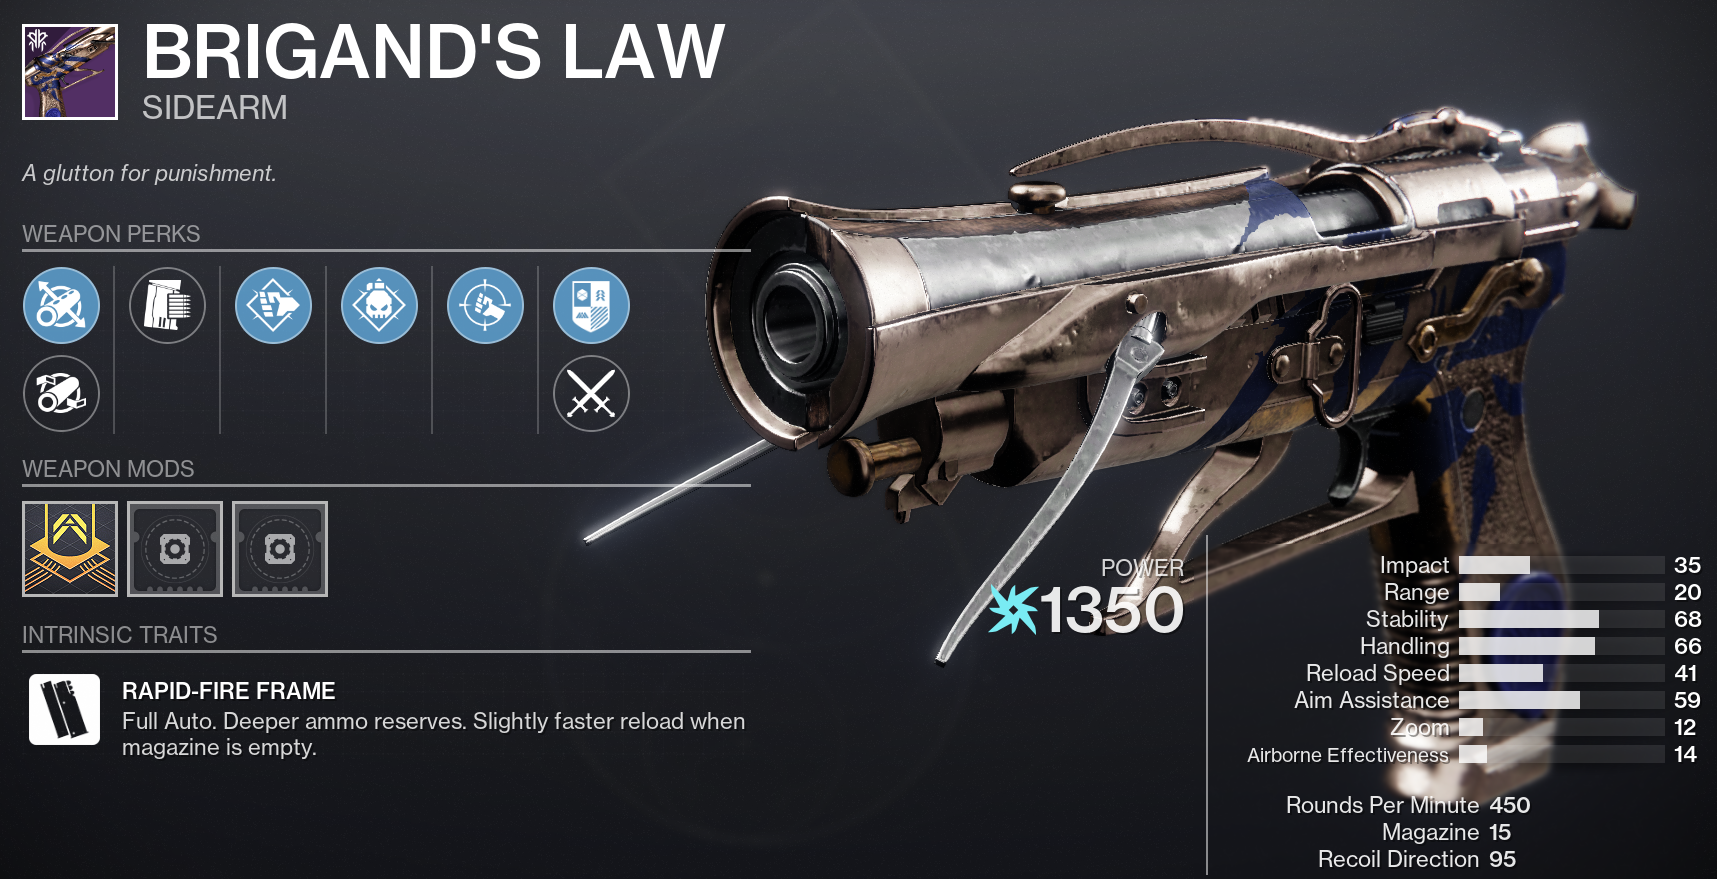 How to get Brigand’s Law in Destiny 2 - Brigand’s Law God Rolls for PvE and PvP 1